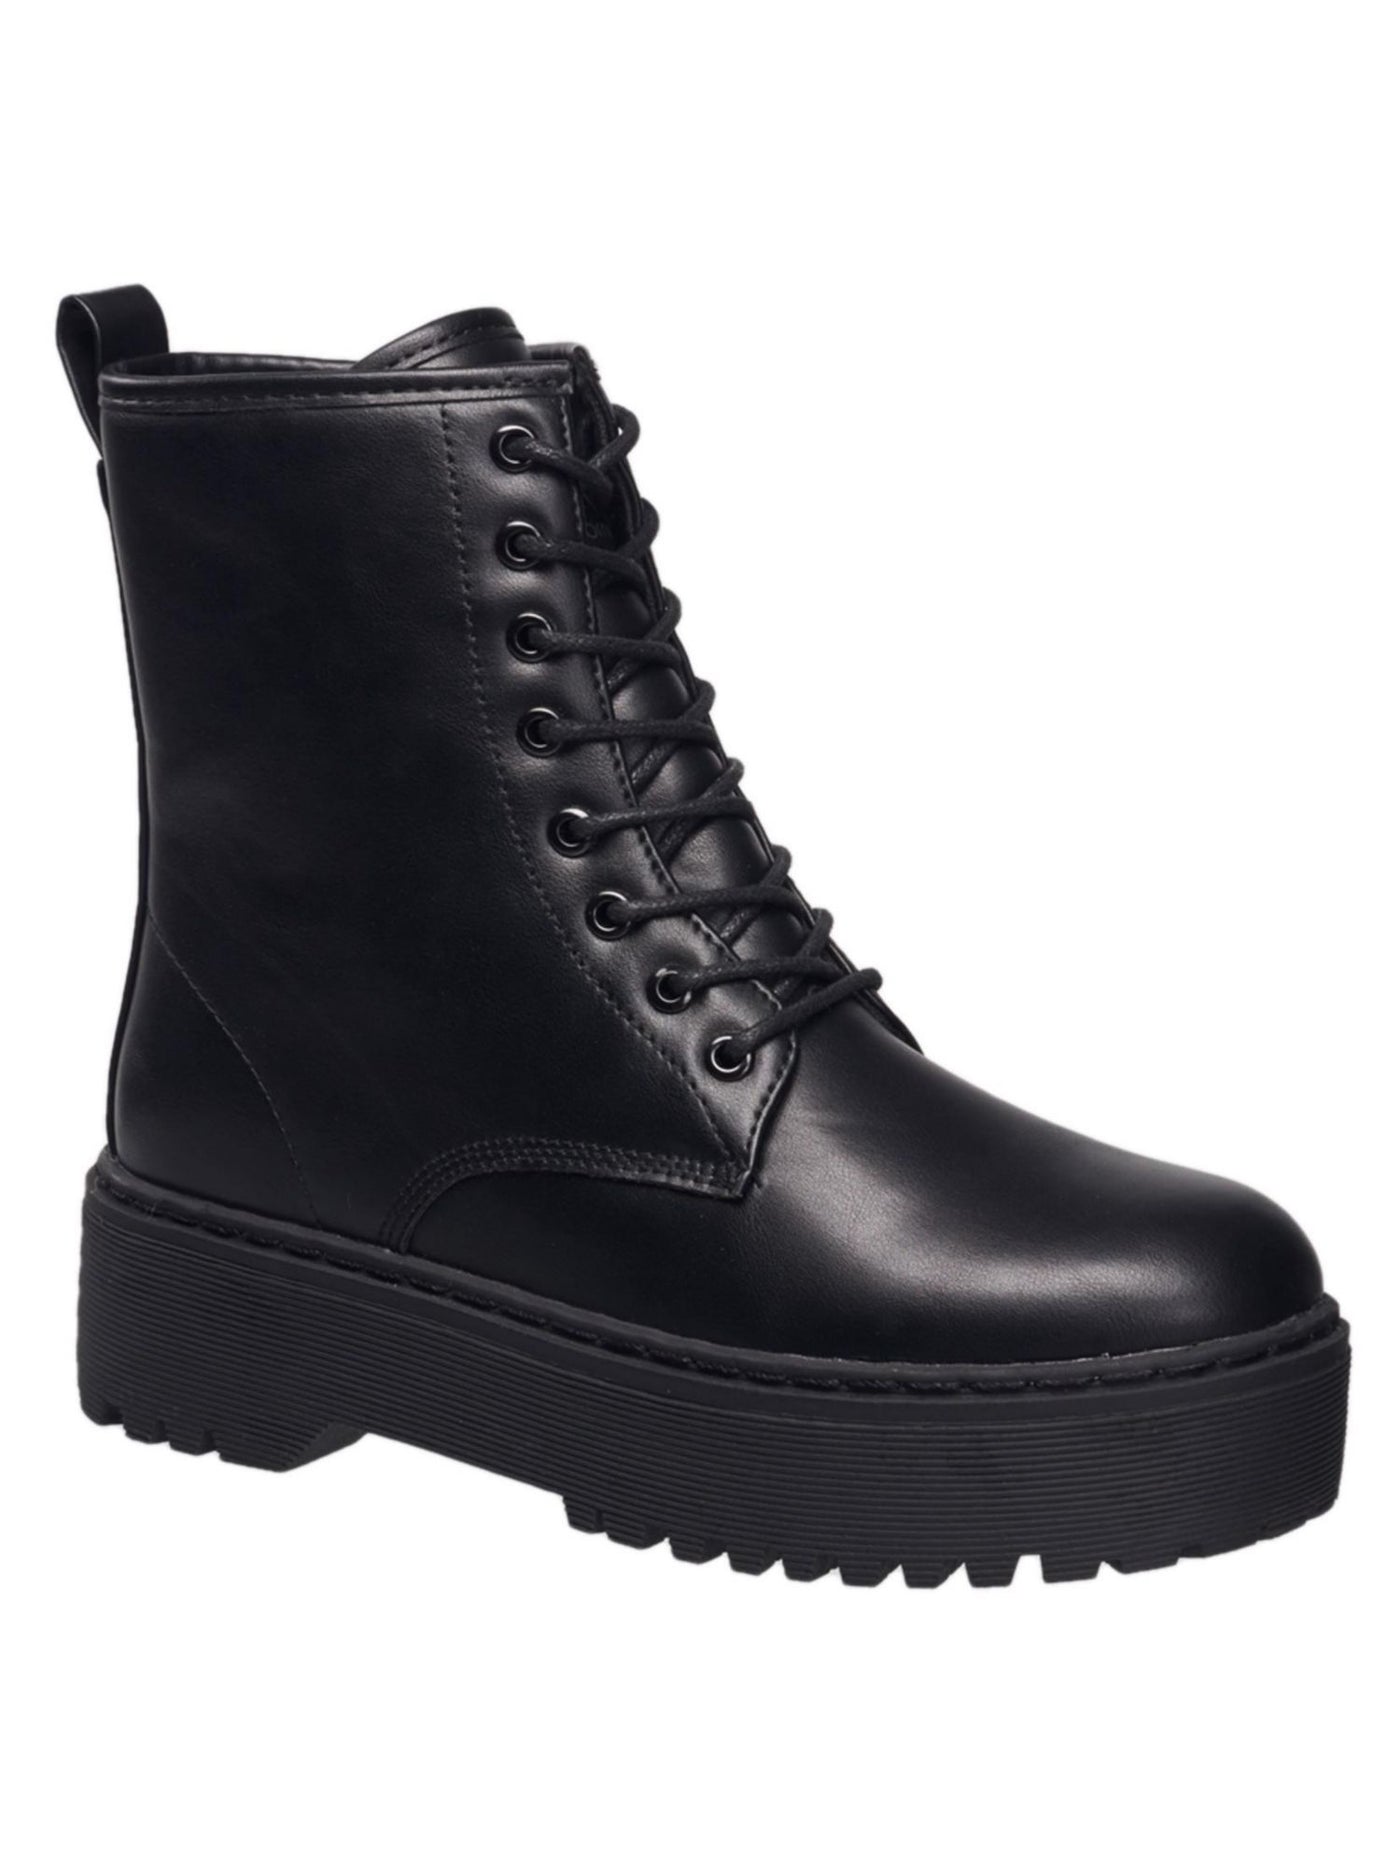 C AND C CALIFORNIA Womens Black 1-1/2" Platform Lace-Up Back Pull-Tab Lug Sole Lucie Round Toe Block Heel Zip-Up Combat Boots 9